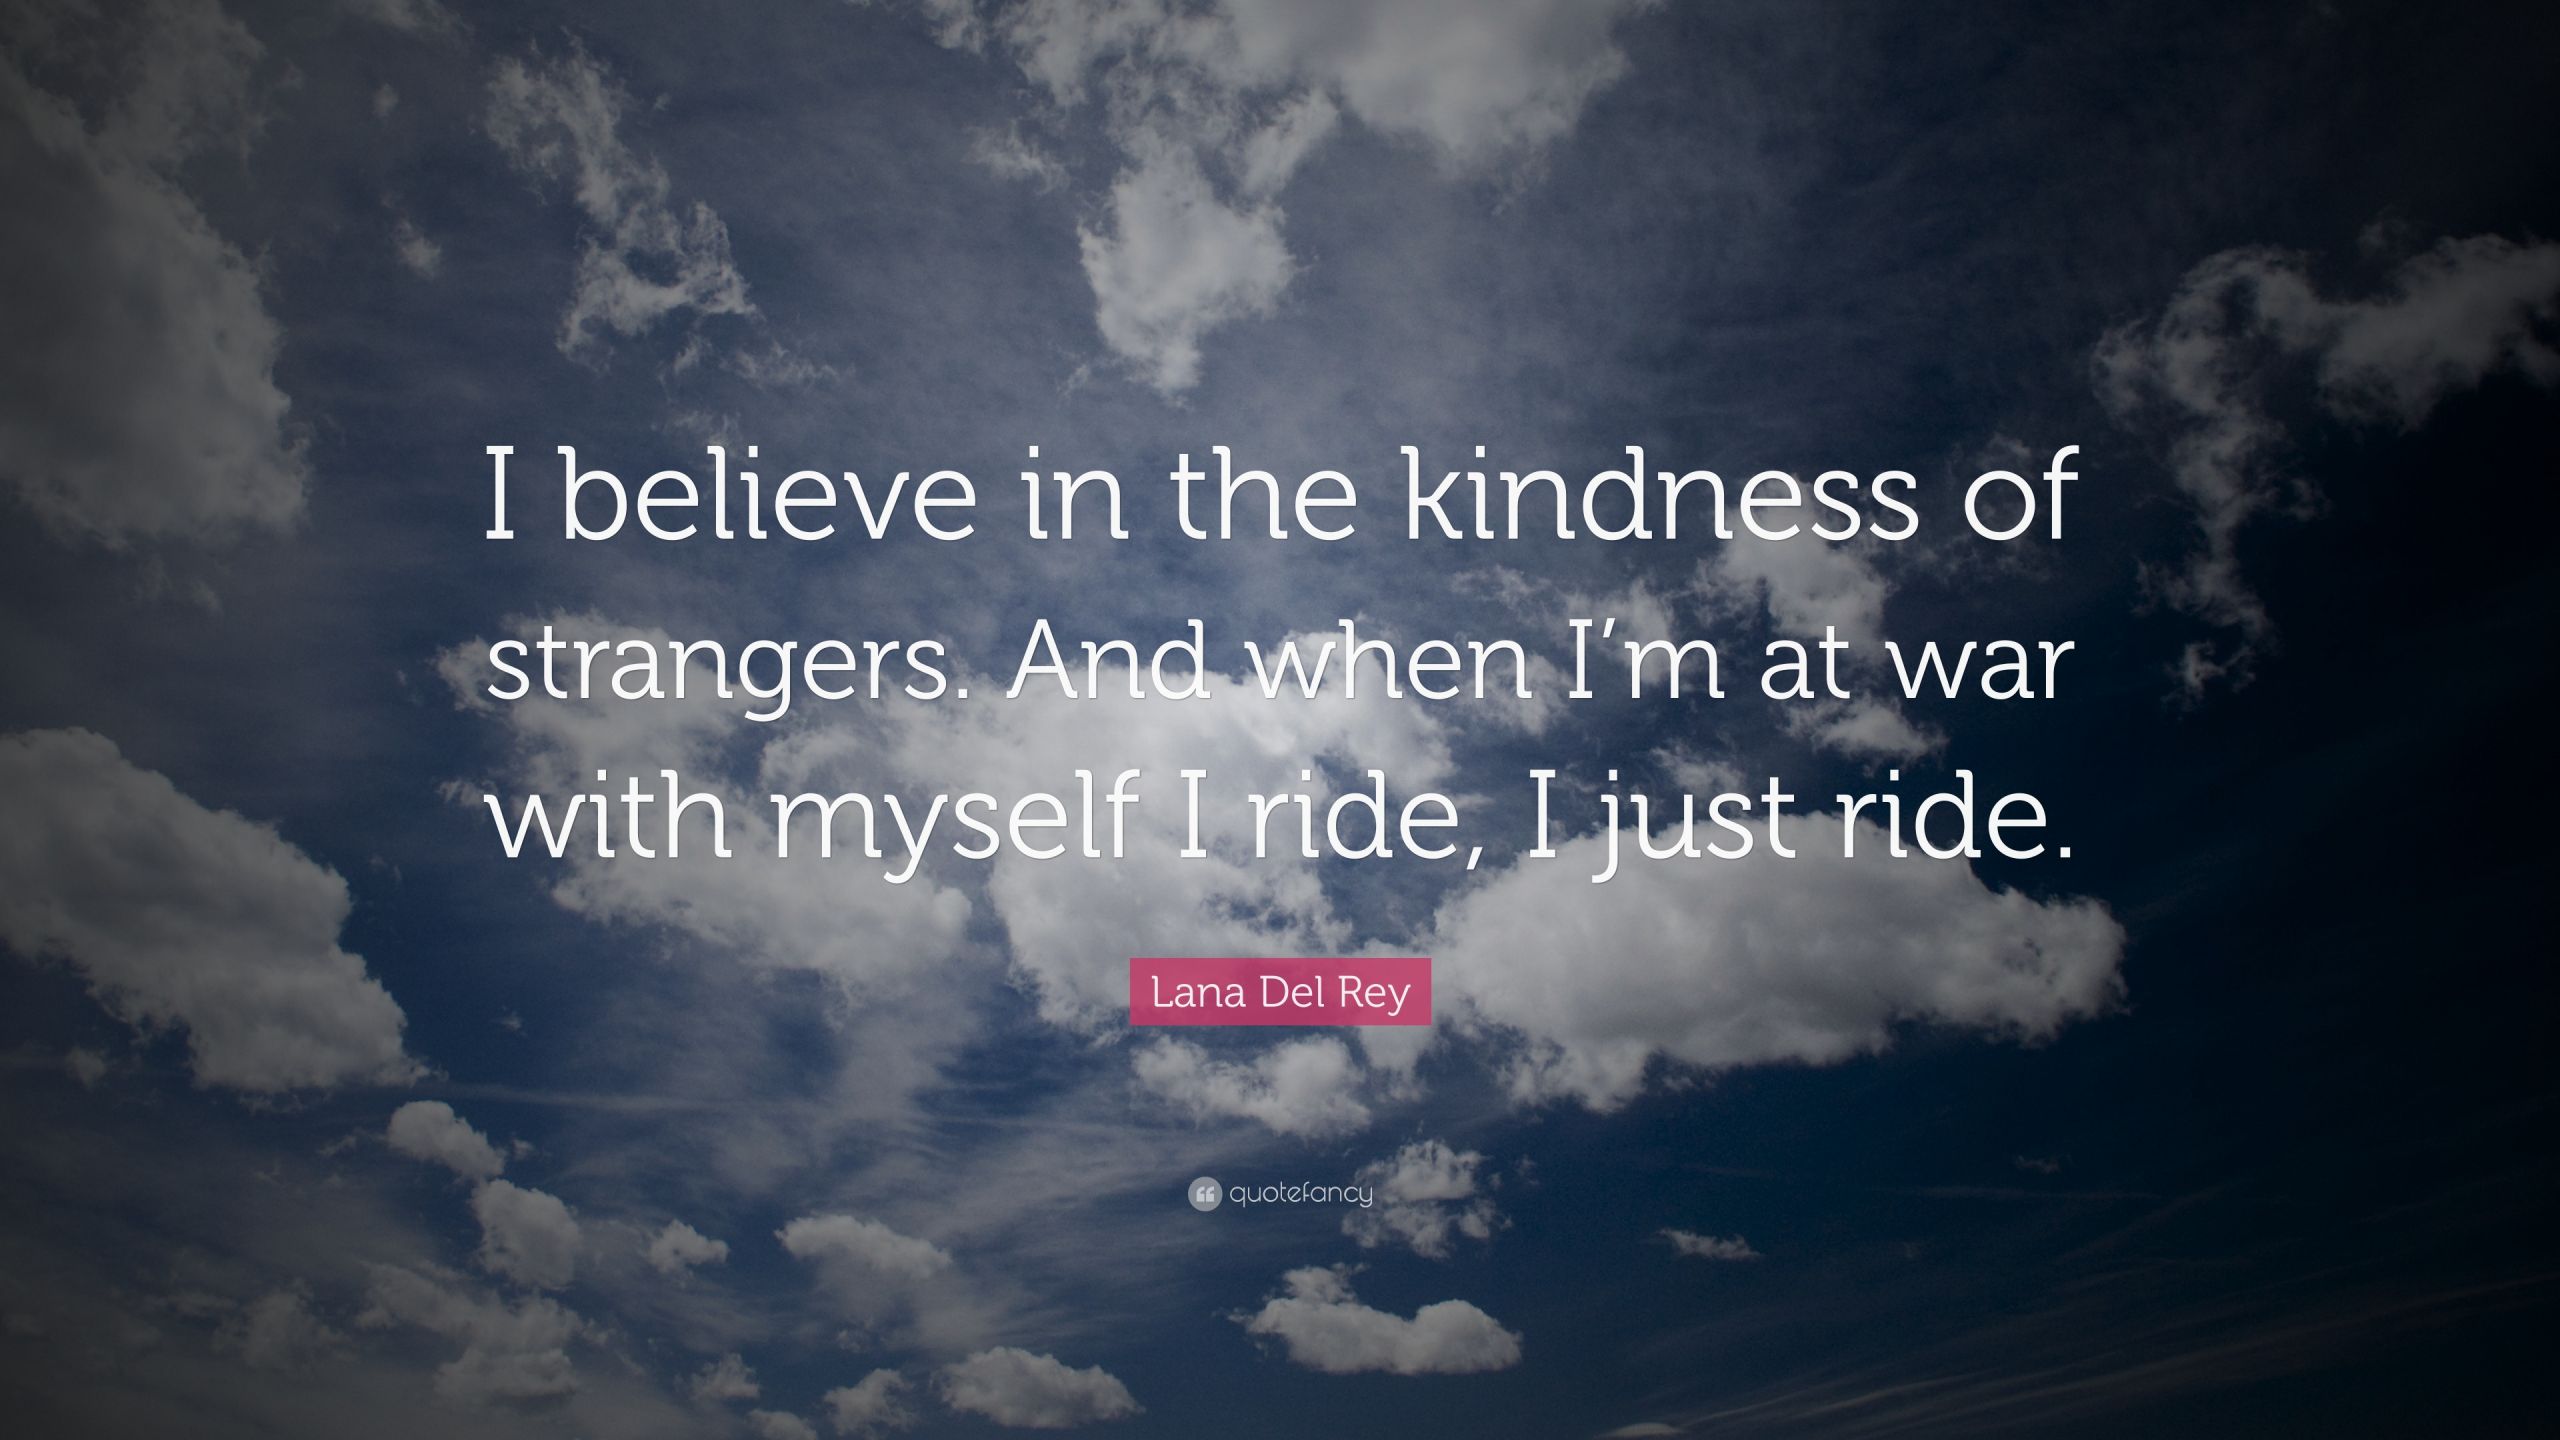 Kindness Of Strangers Quotes
 Kindness Quotes 40 wallpapers Quotefancy